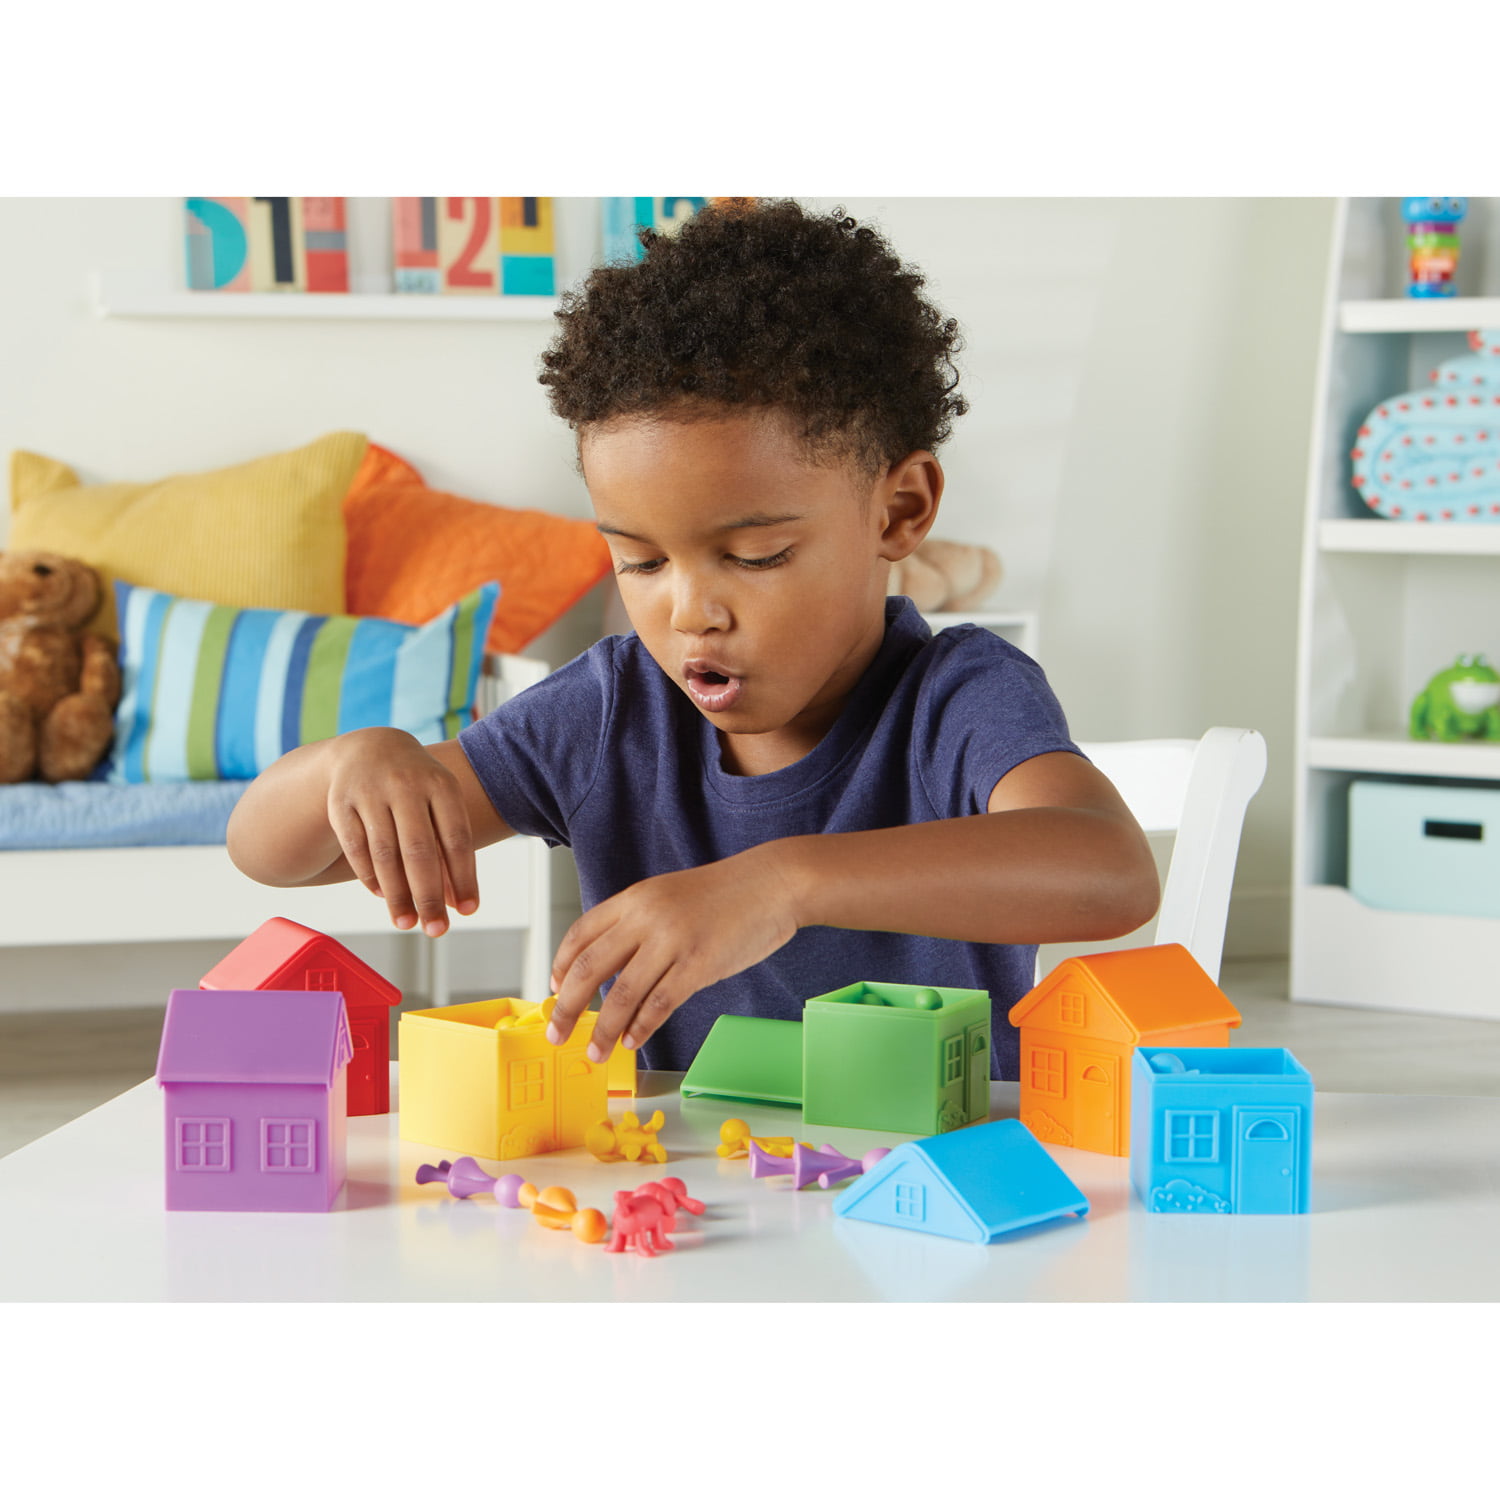 Imaginative Play Learning Resources All About Me Sorting Neighborhood Fine Motor & Sorting Skills Special Education Actives Montessori Toys 6 Pieces 